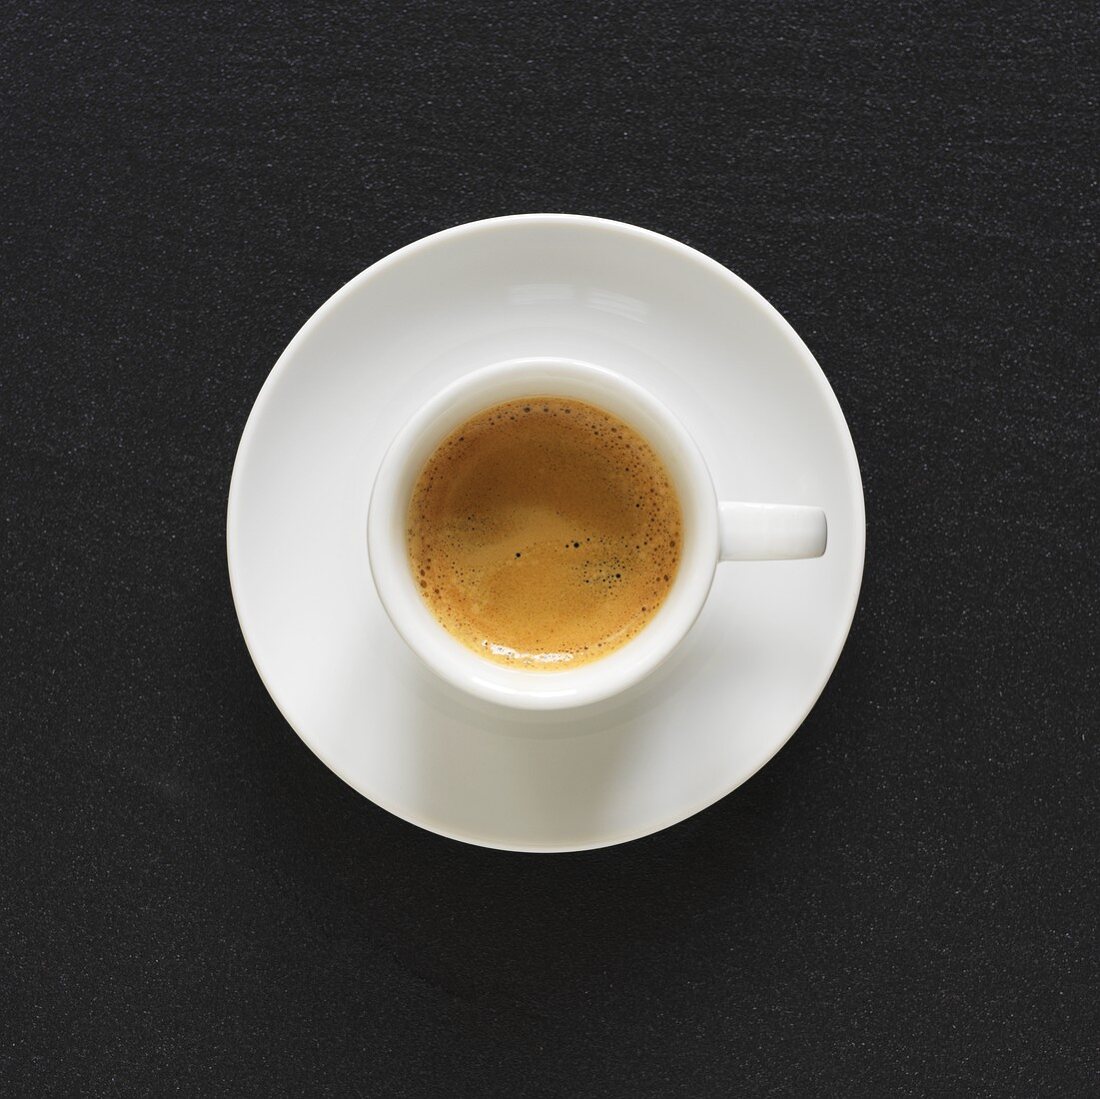 A cup of espresso from above